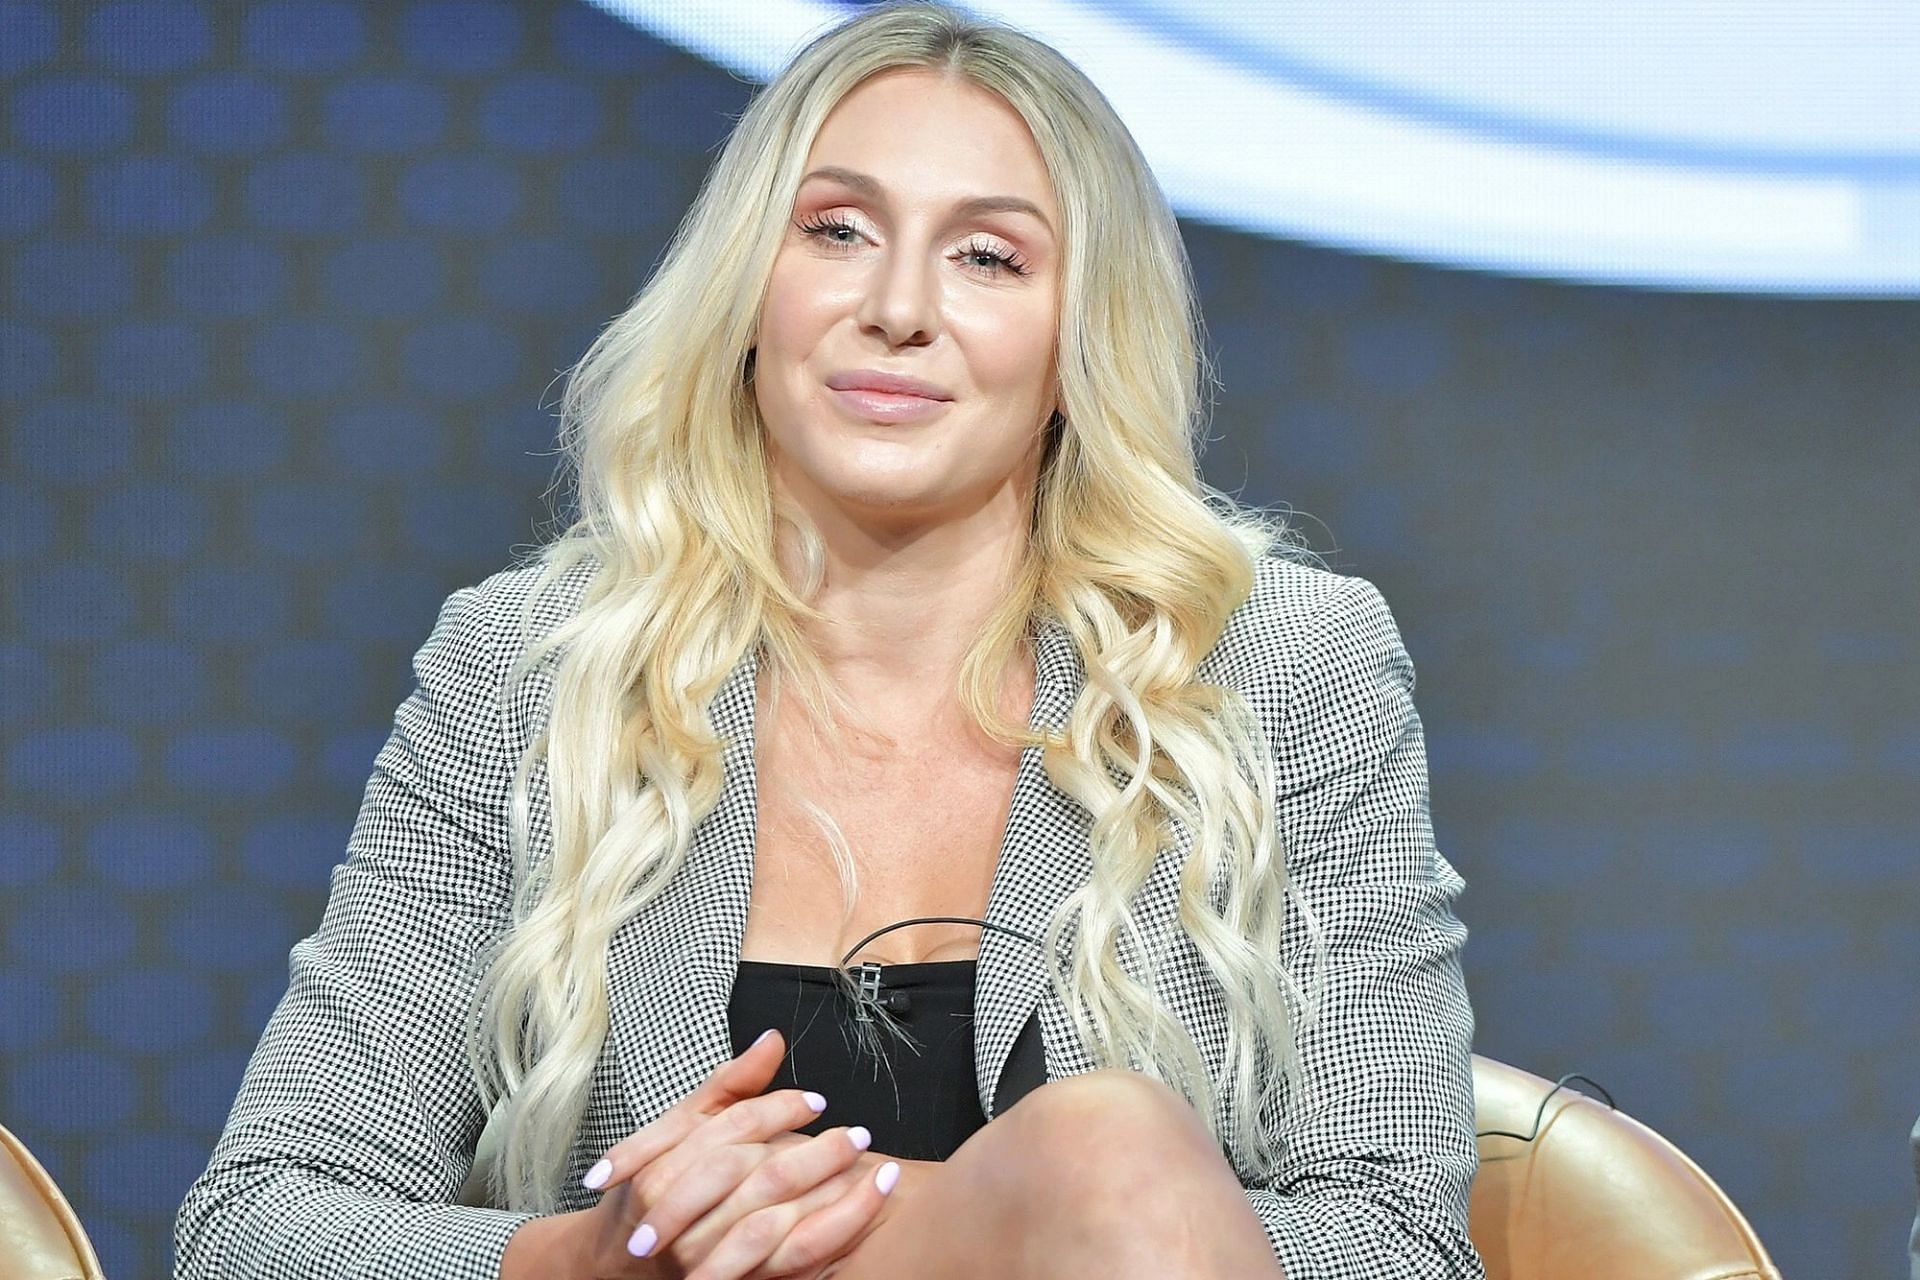 Charlotte Flair has been pulled out of upcoming media appearances.